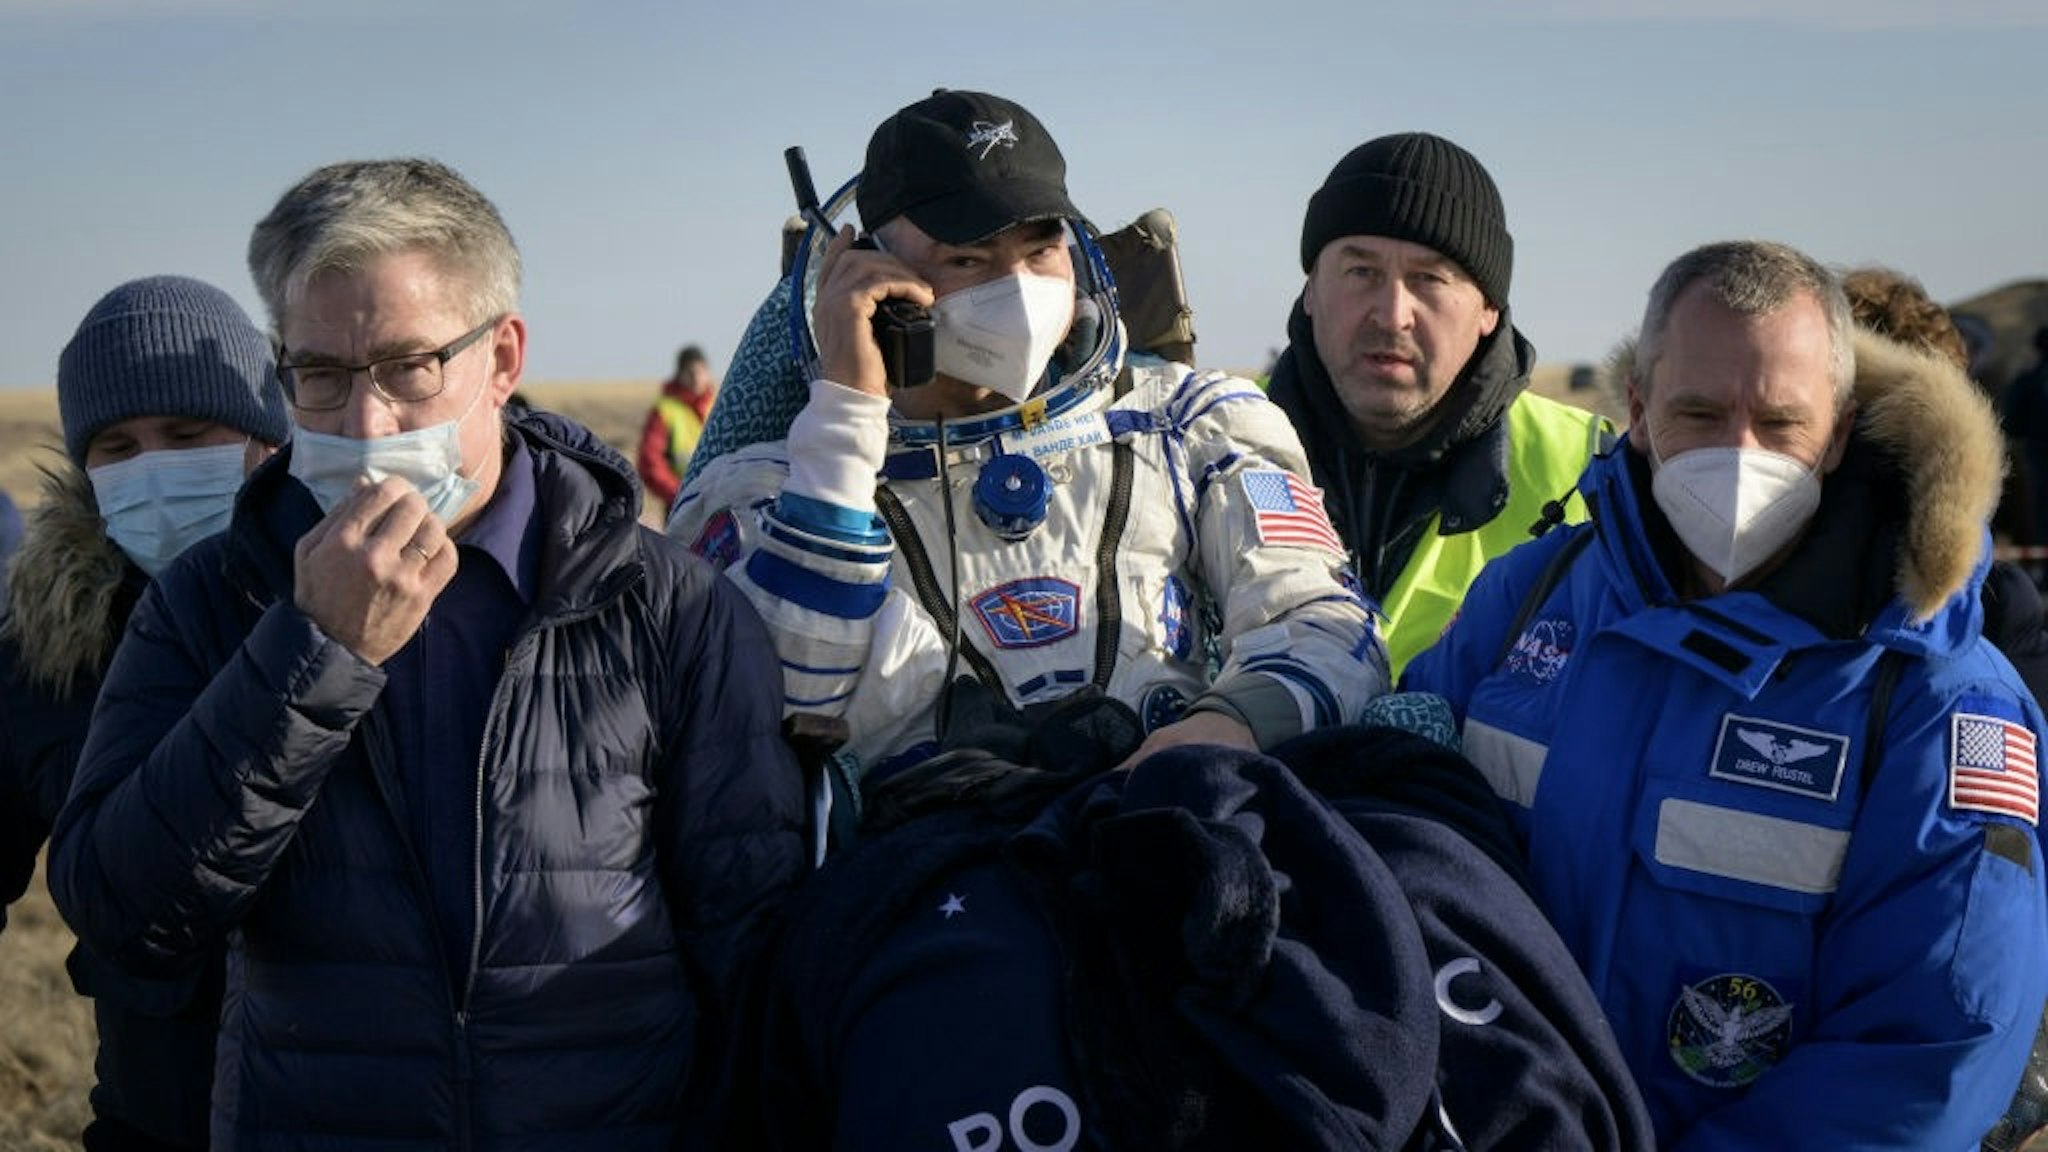 Expedition 66 Soyuz Landing ZHEZKAZGAN, KAZAKHSTAN - MARCH 30: In this handout image provided by the U.S. National Aeronatics and Space Administration (NASA), Expedition 66 NASA astronaut Mark Vande Hei is carried to a medical tent shortly after he and fellow crew mates Pyotr Dubrov and Anton Shkaplerov of Roscosmos landed in their Soyuz MS-19 spacecraft near the town of Zhezkazgan on March 30, 2022 in Zhezkazgan, Kazakhstan. Vande Hei and Dubrov are returning to Earth after logging 355 days in space as members of Expeditions 64-66 aboard the International Space Station. For Vande Hei, his mission is the longest single spaceflight by a U.S. astronaut in history. Shkaplerov is returning after 176 days in space, serving as a Flight Engineer for Expedition 65 and commander of Expedition 66. (Photo by Bill Ingalls/NASA/Getty Images) Bill Ingalls/NASA / Handout via Getty Images